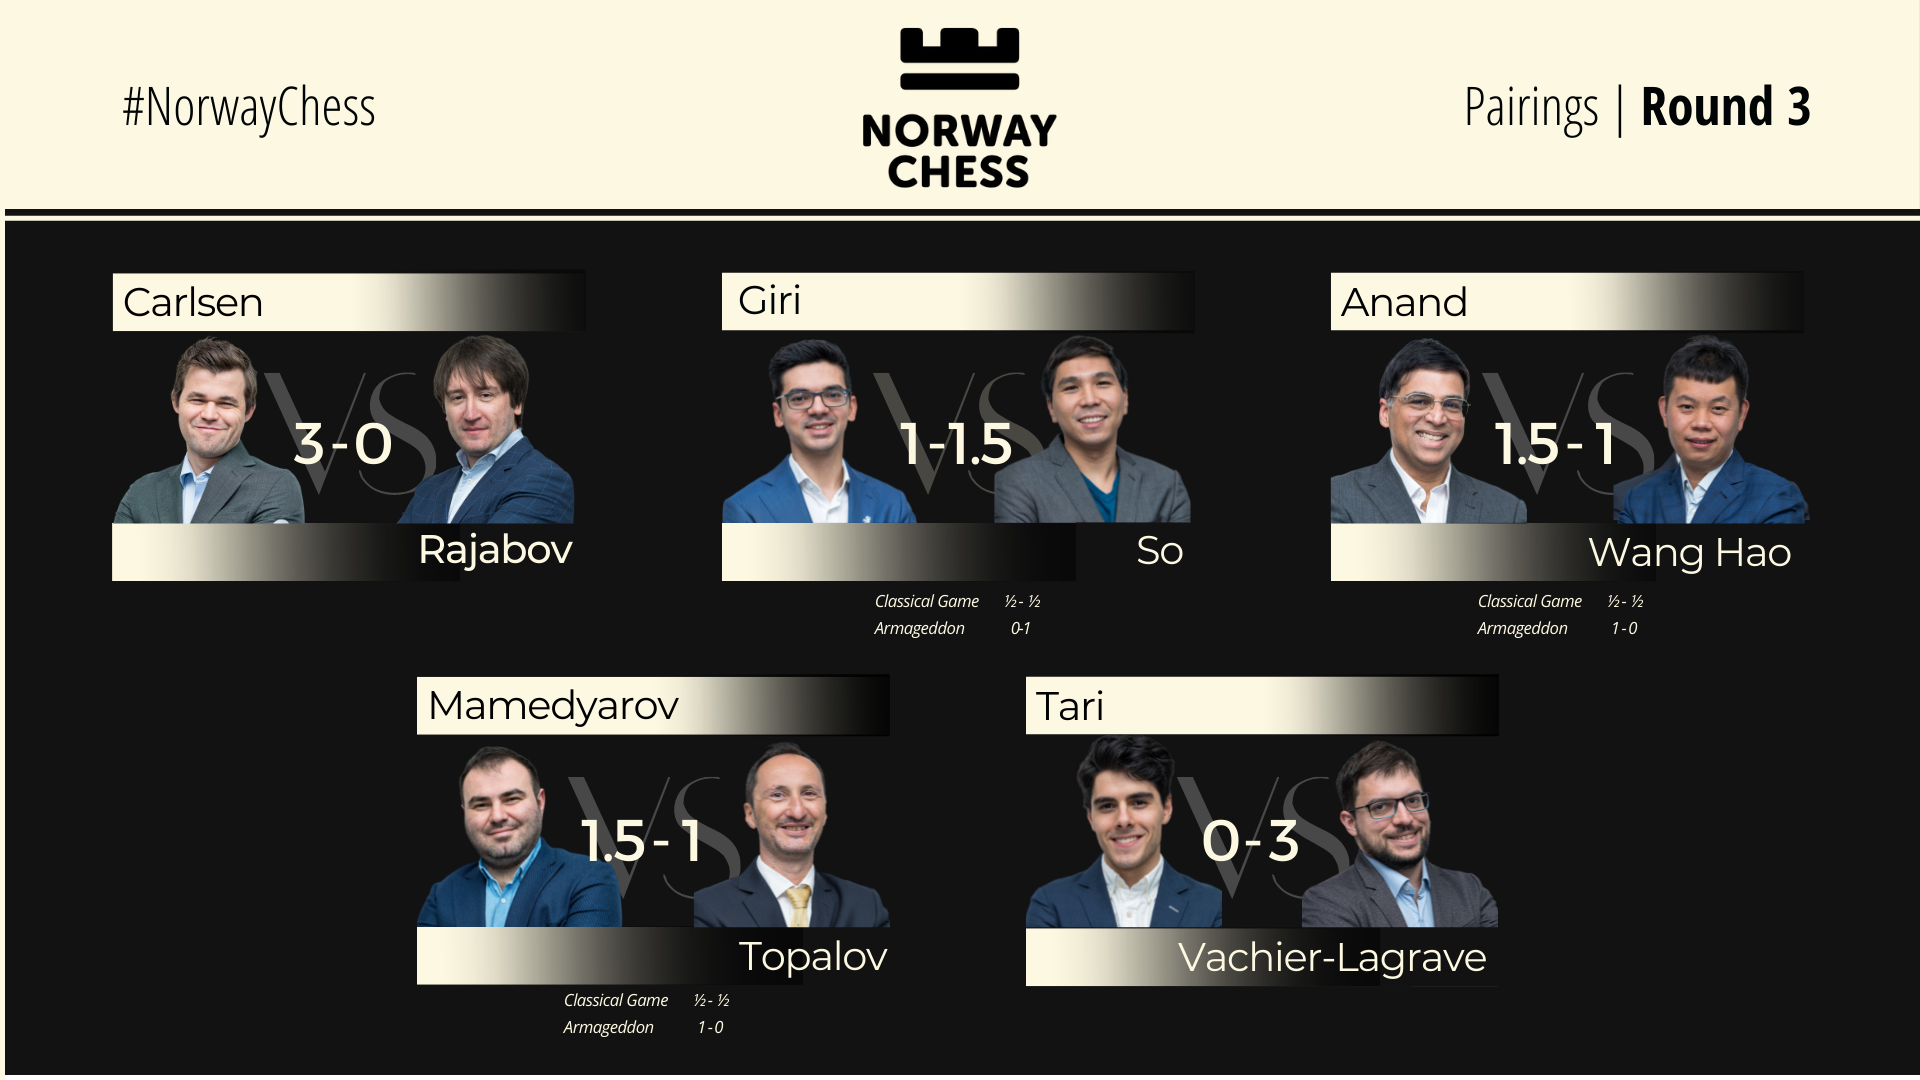 Norway Chess Results Round 3